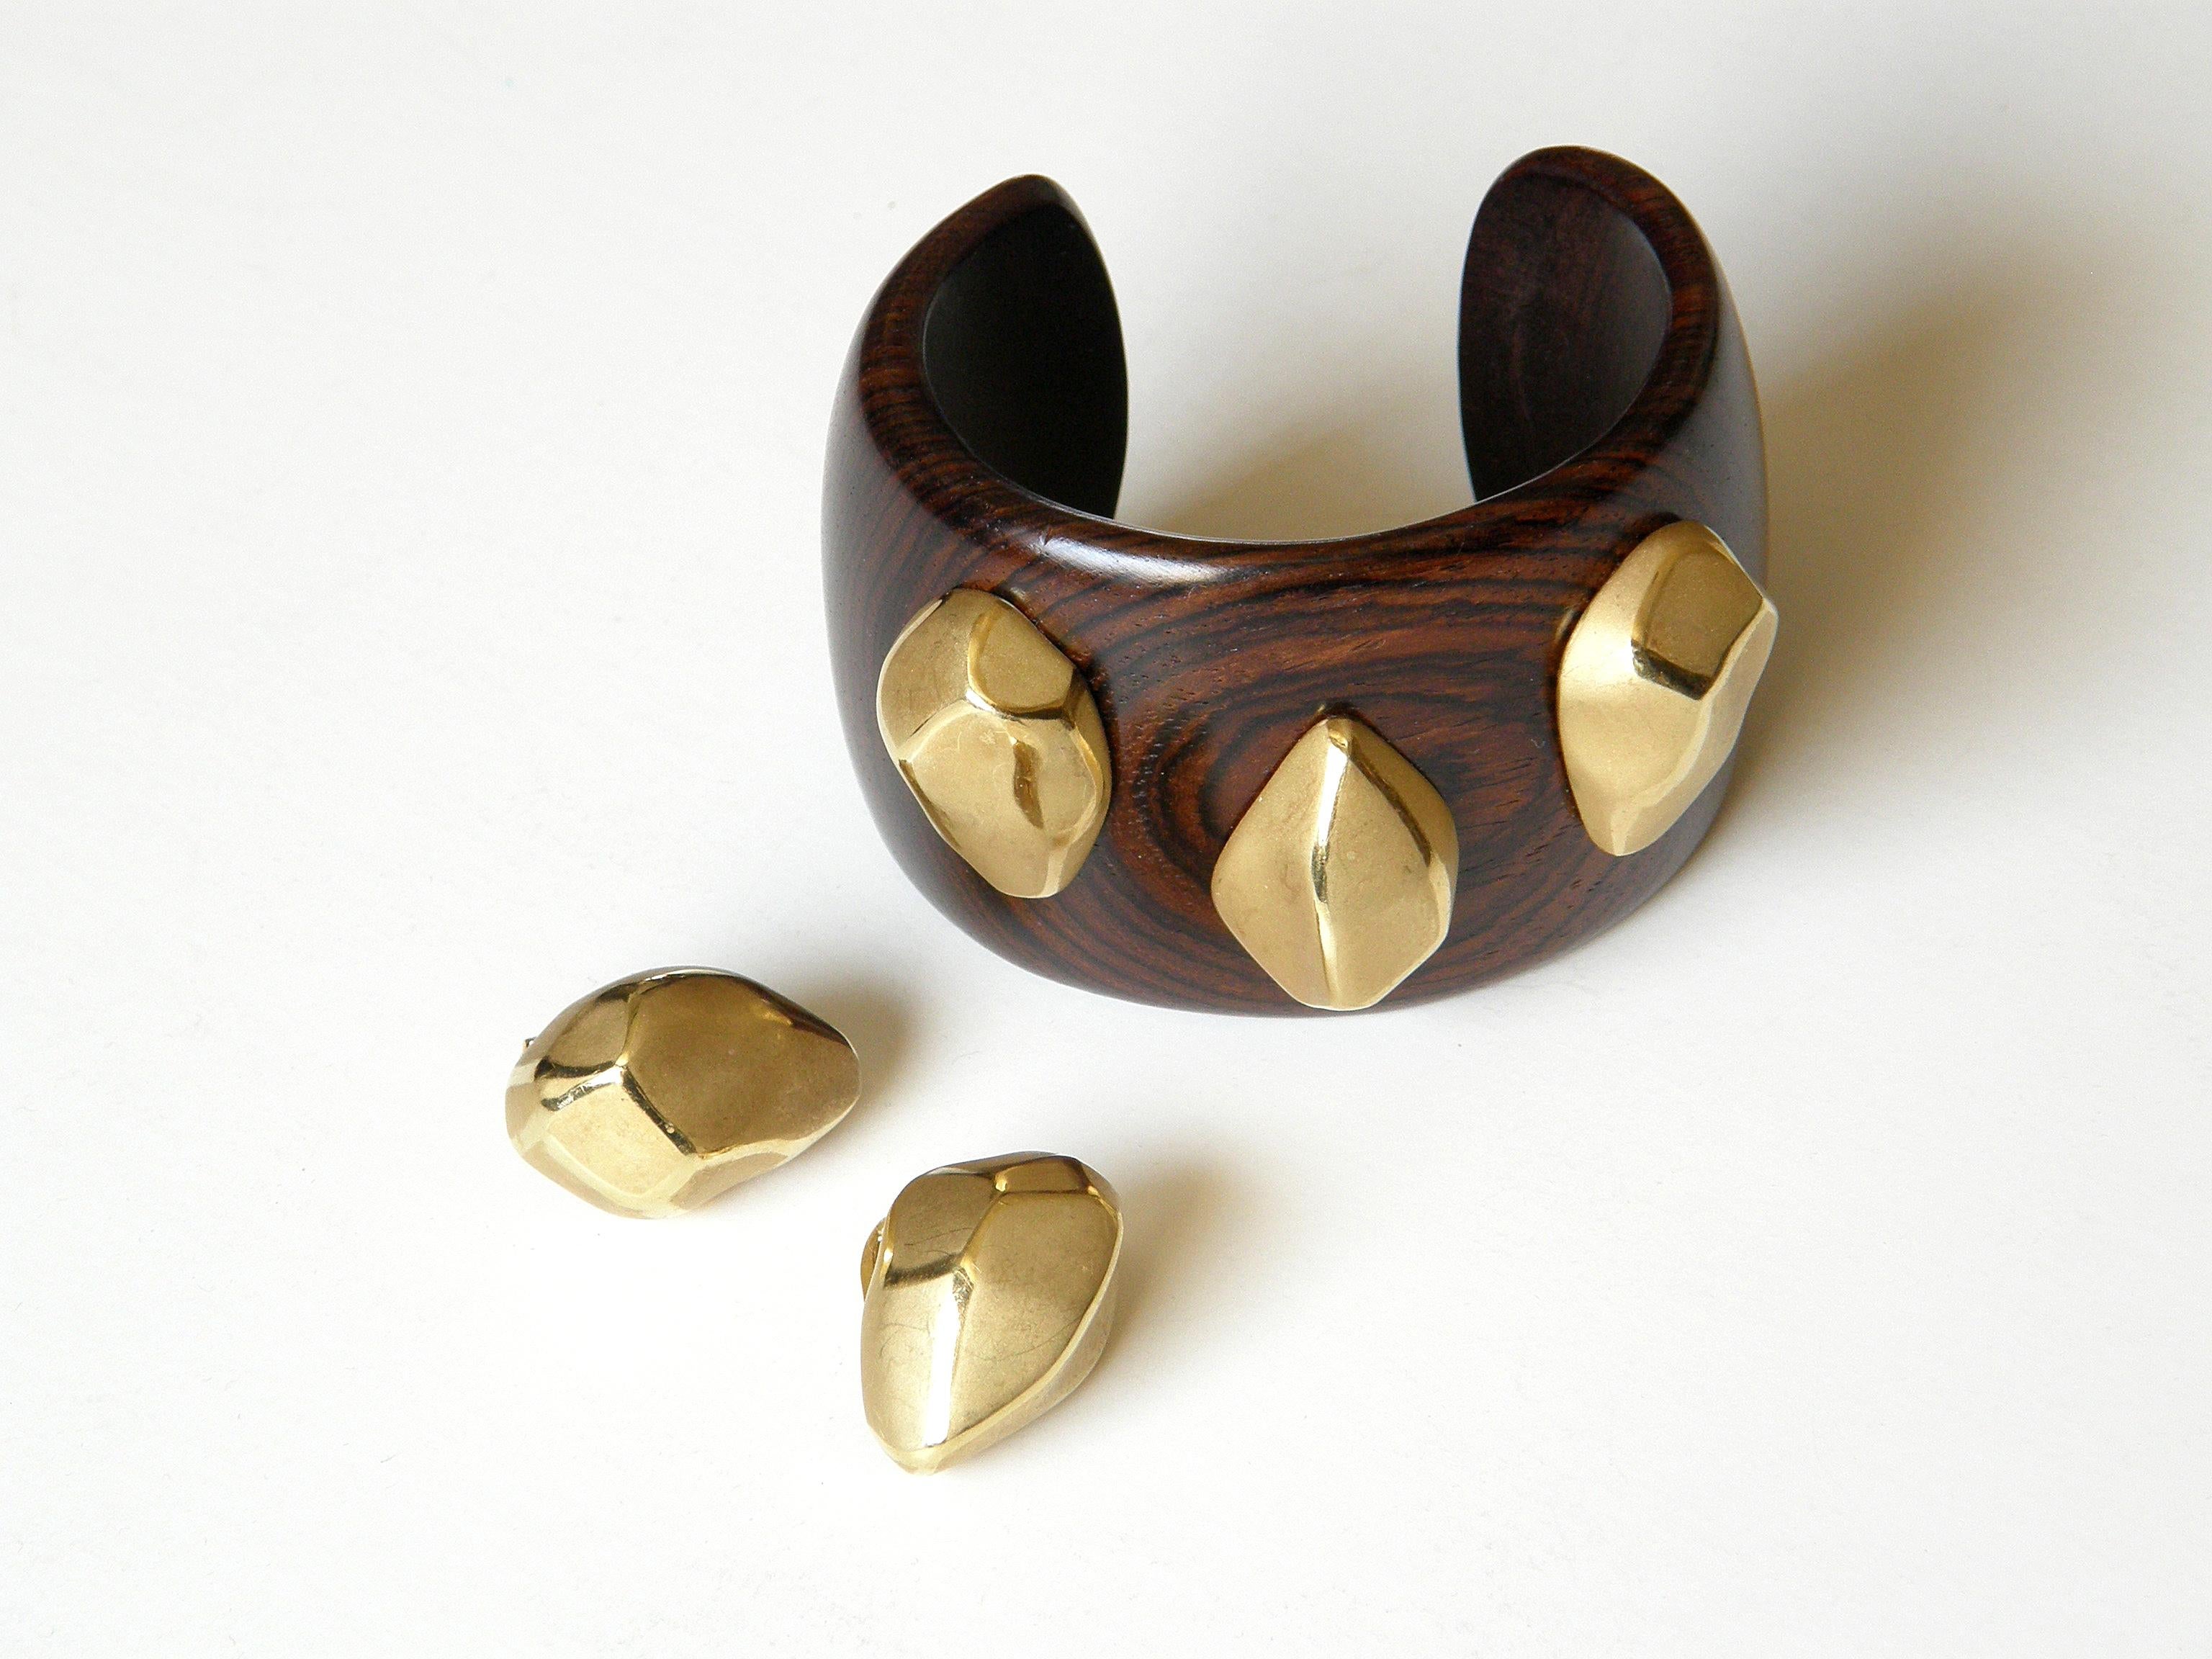 This 18k gold and wood cuff bracelet and clip-on earrings set was designed and made in Italy by Massimo Sanalitro. His bold and modern design features softly faceted, yellow gold “stones” as earrings and embellishments on the bracelet. They have a